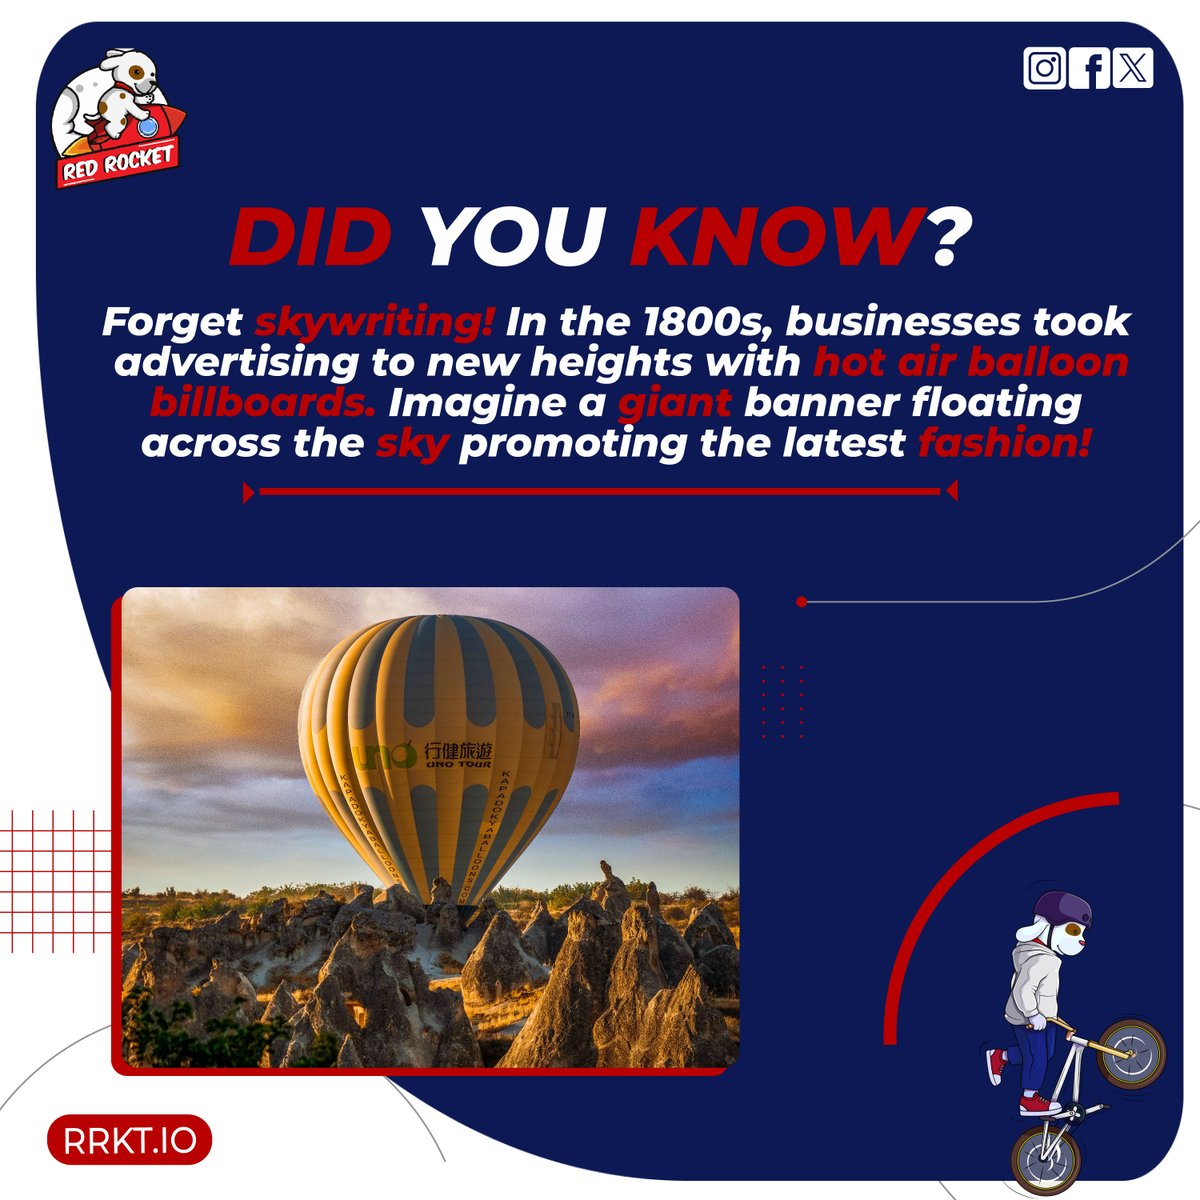 Forget skywriting! In the 1800s, businesses took advertising to new heights with hot air balloon billboards. Imagine a giant banner floating across the sky promoting the latest fashion!
.
Visit our website 👉rrkt.io
.
#websitetraffic #trafficgeneration #seotraffic